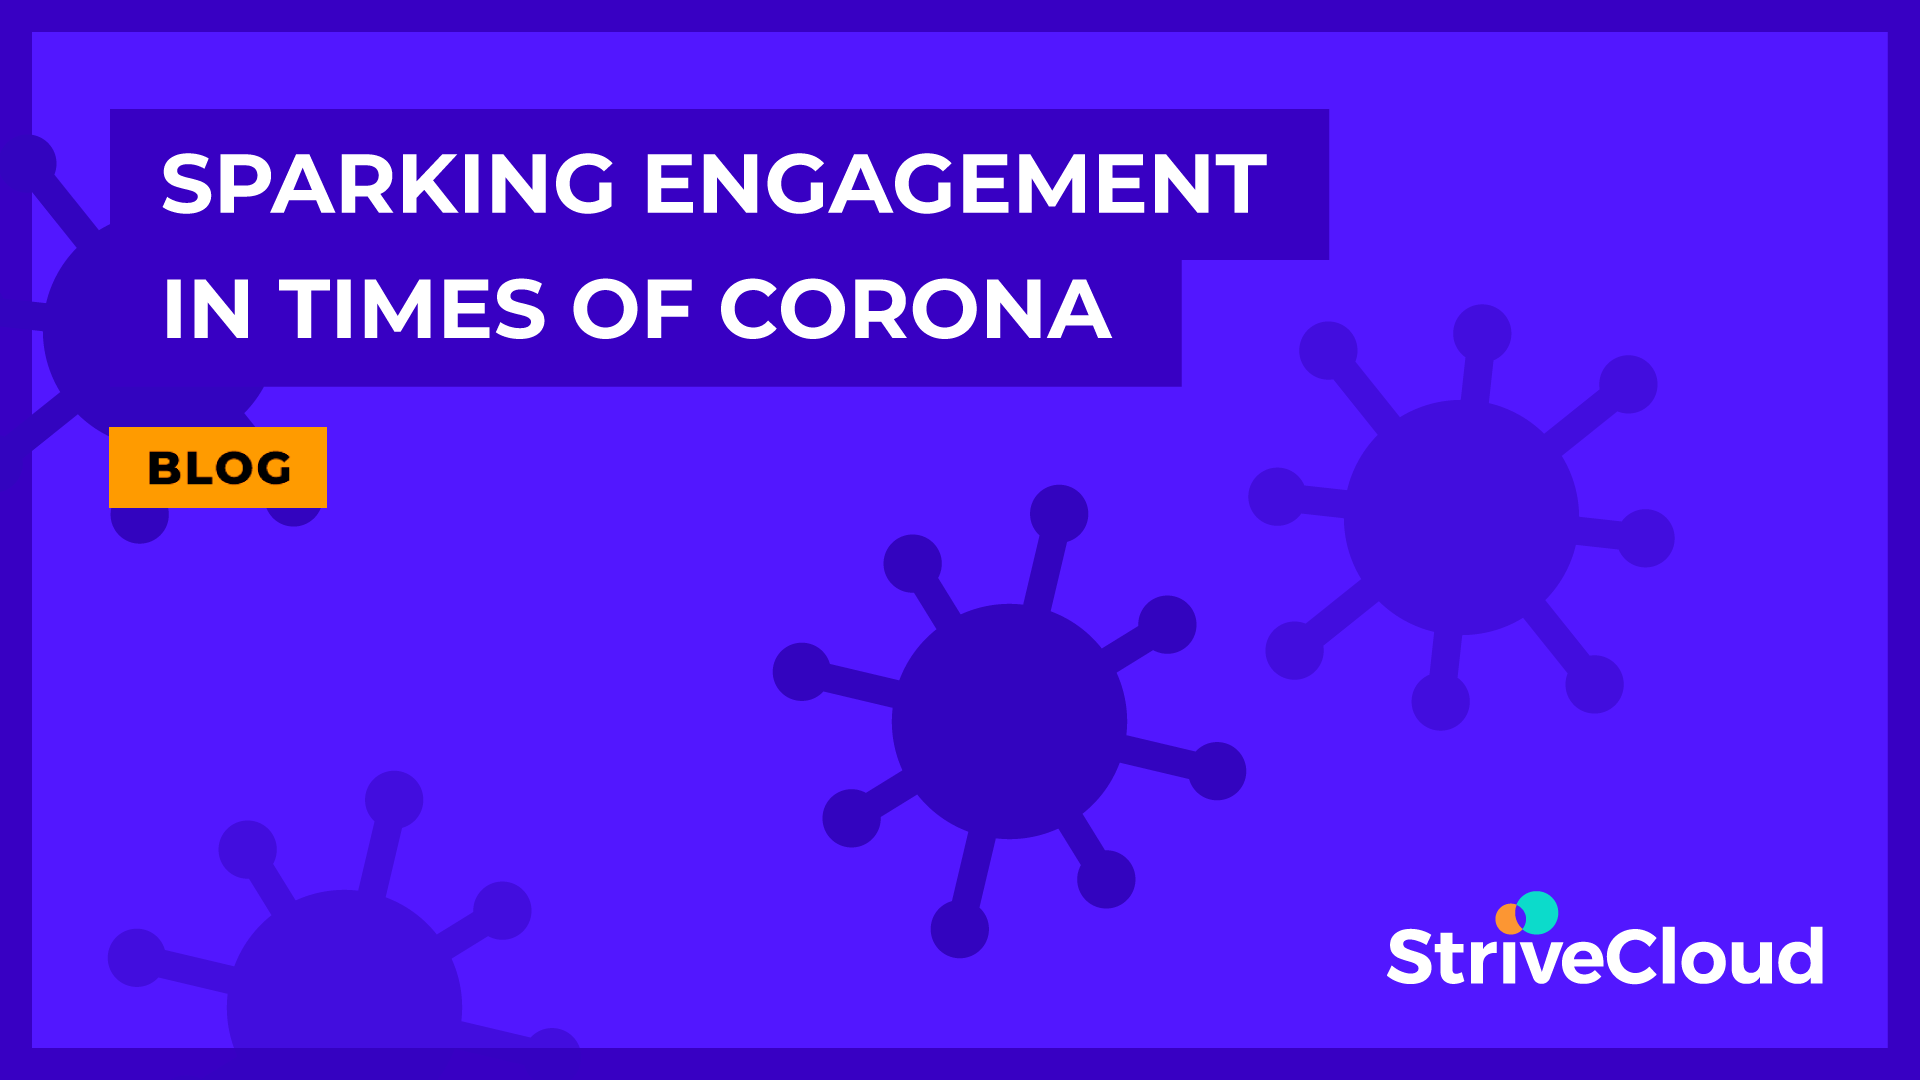 Sparking engagement in times of corona